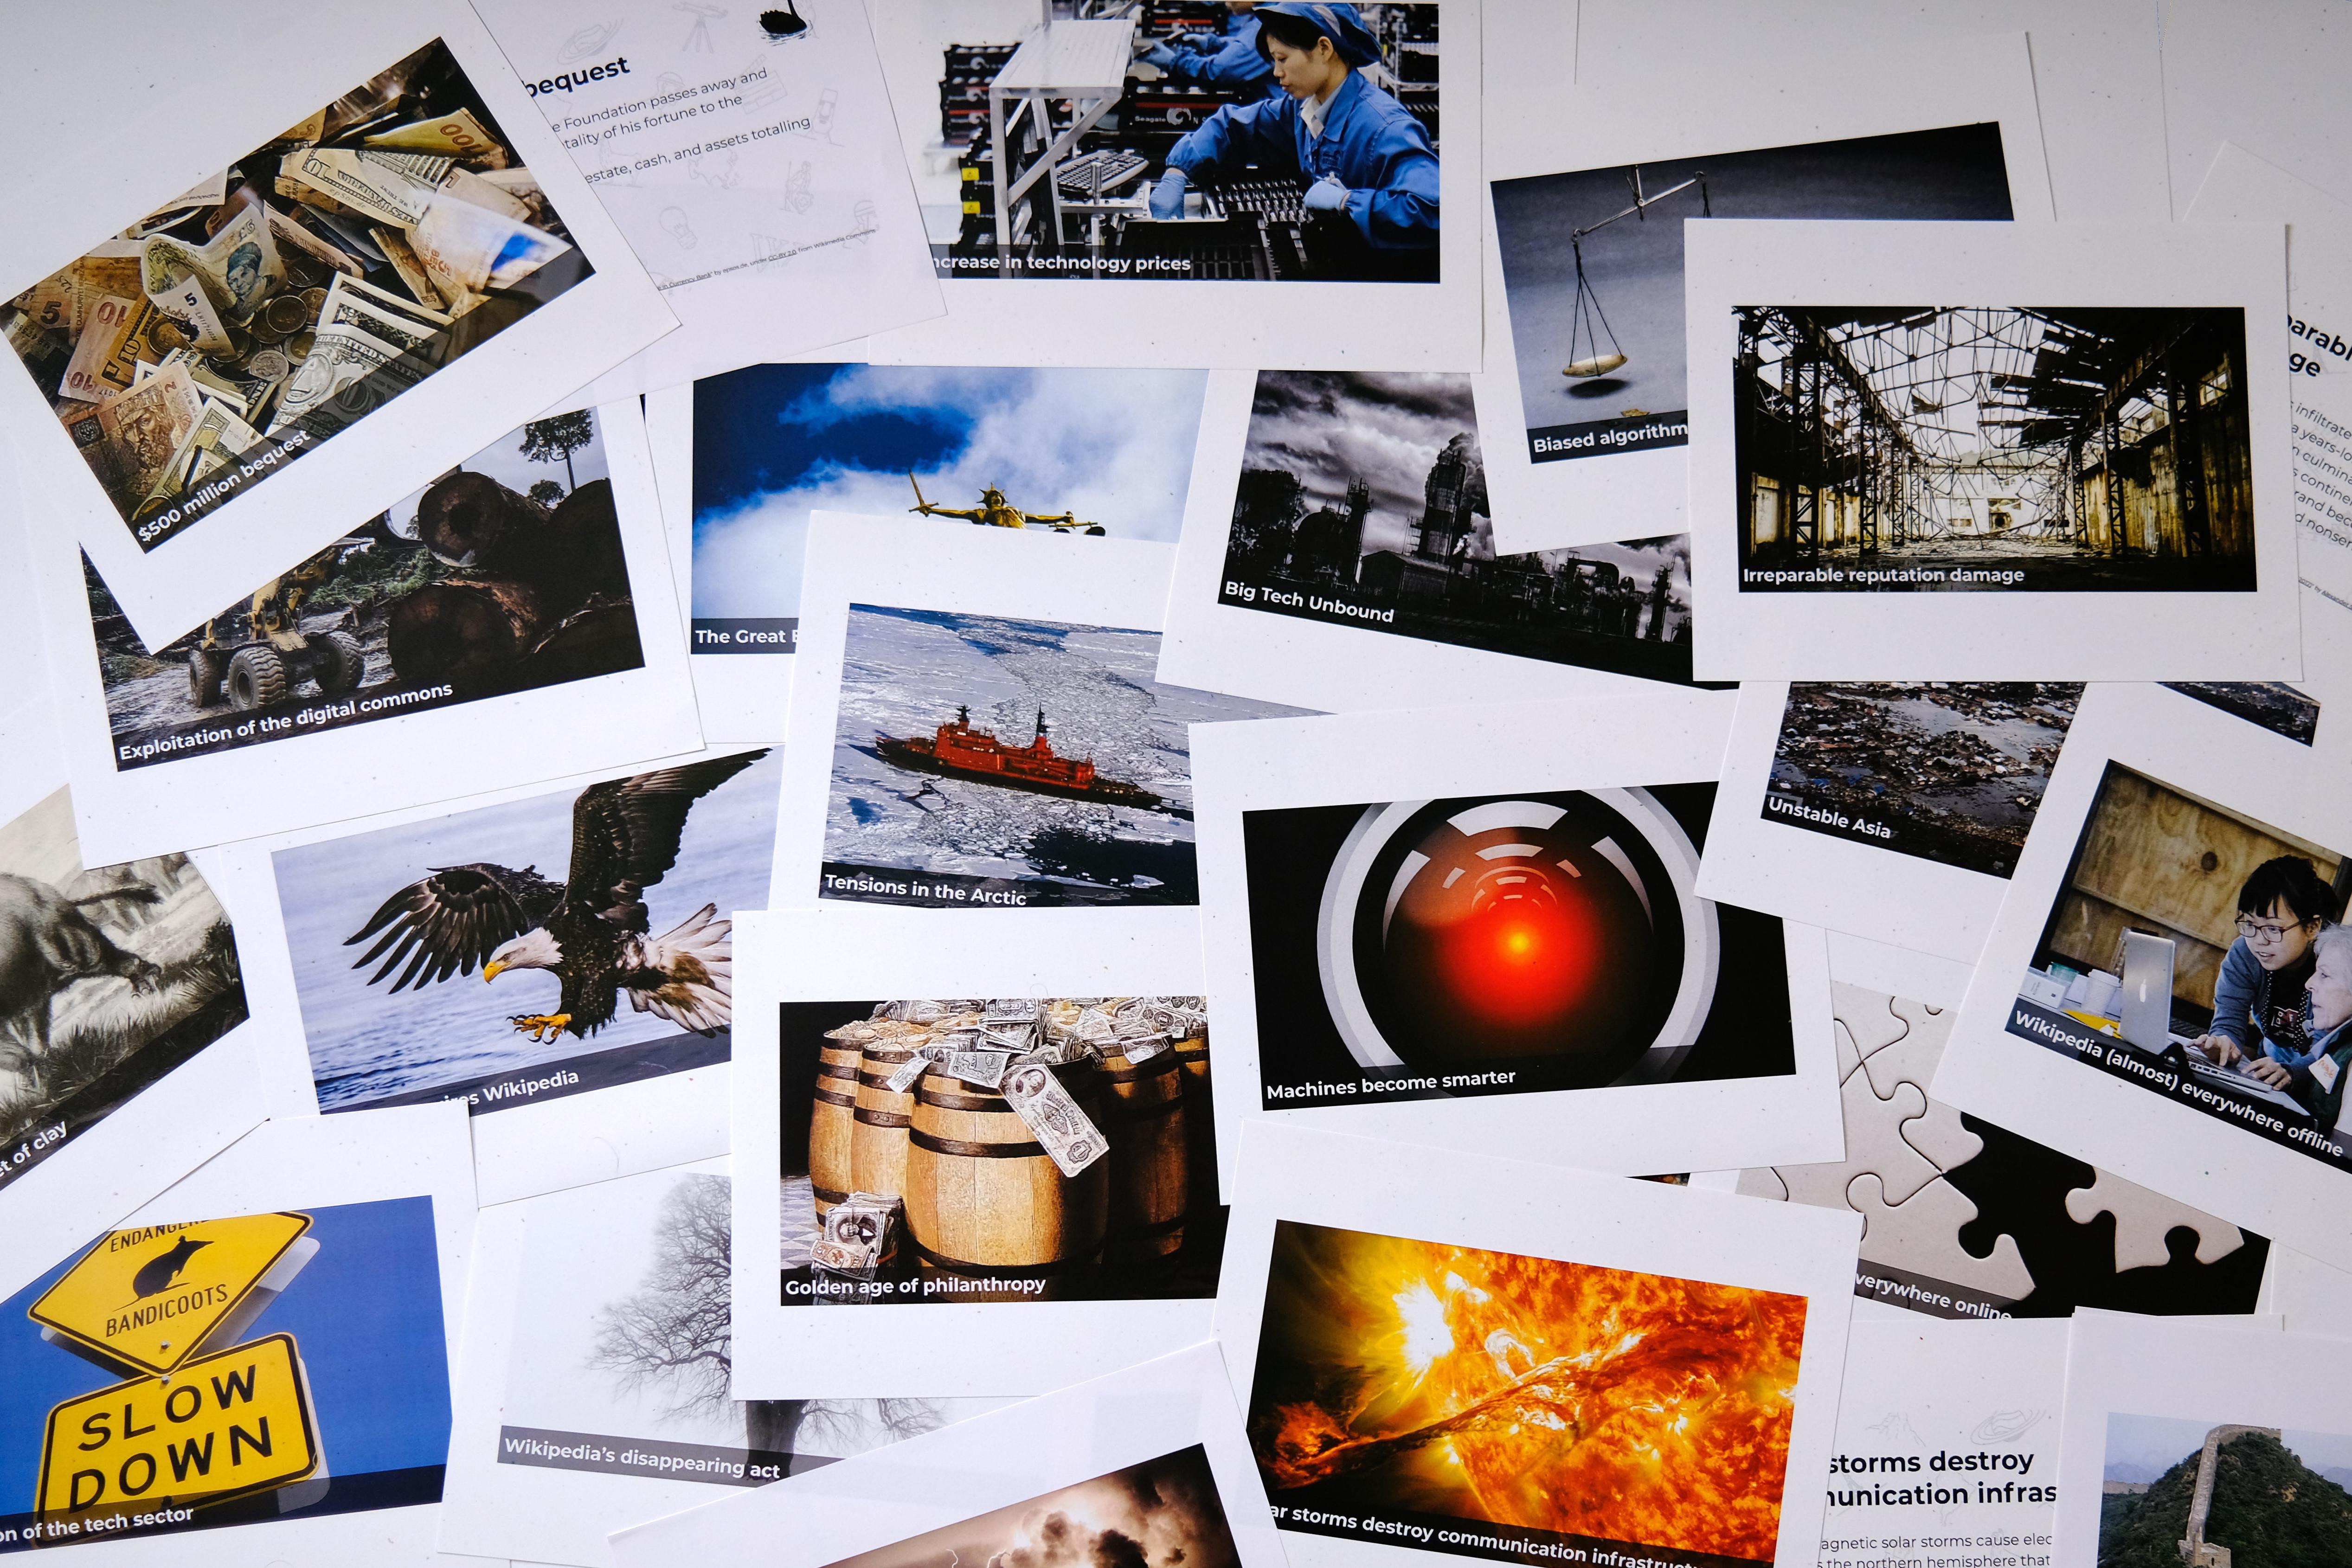 Photograph of two dozen scenario cards printed on large sheets of thick paper, showing various images with titles, and messily arranged on a surface.